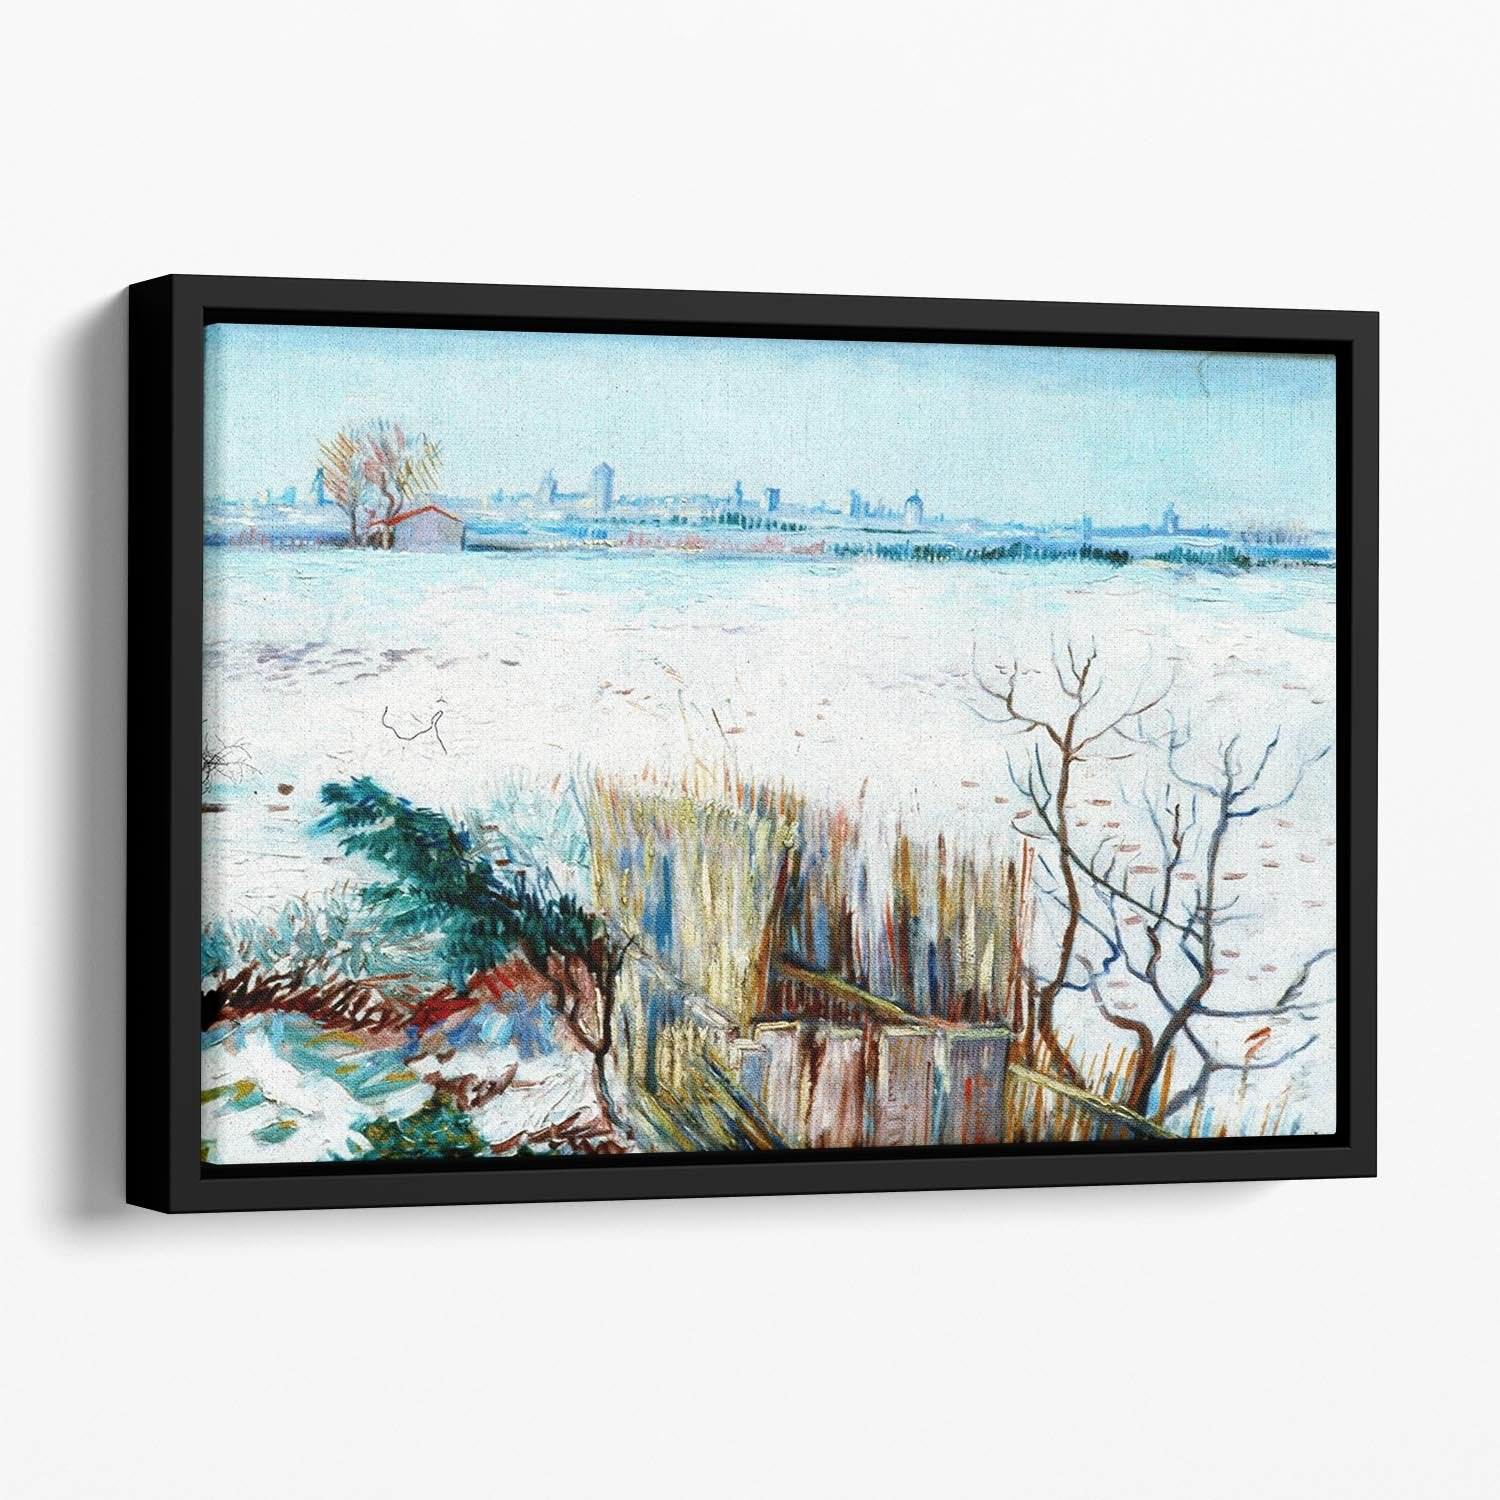 Snowy Landscape with Arles in the Background by Van Gogh Floating Framed Canvas